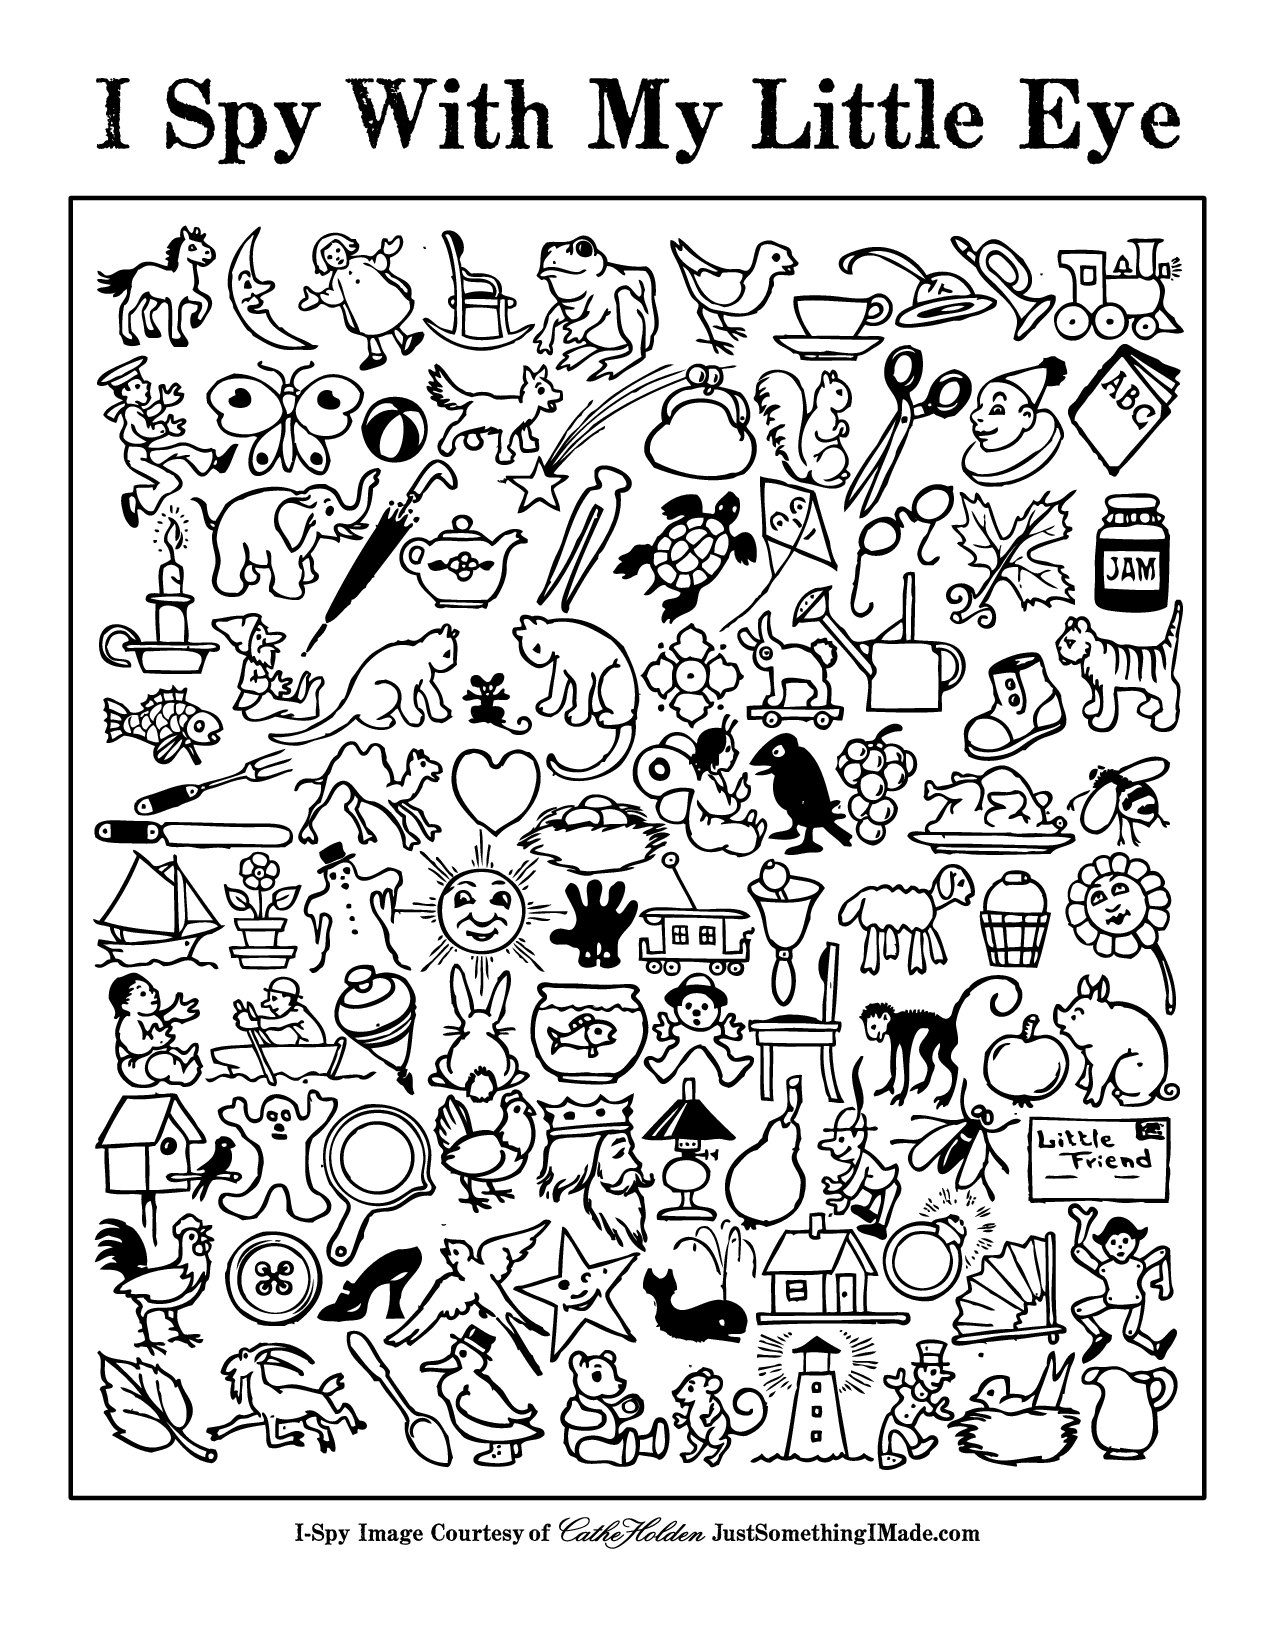 I Spy Coloring Pages for Kids Image